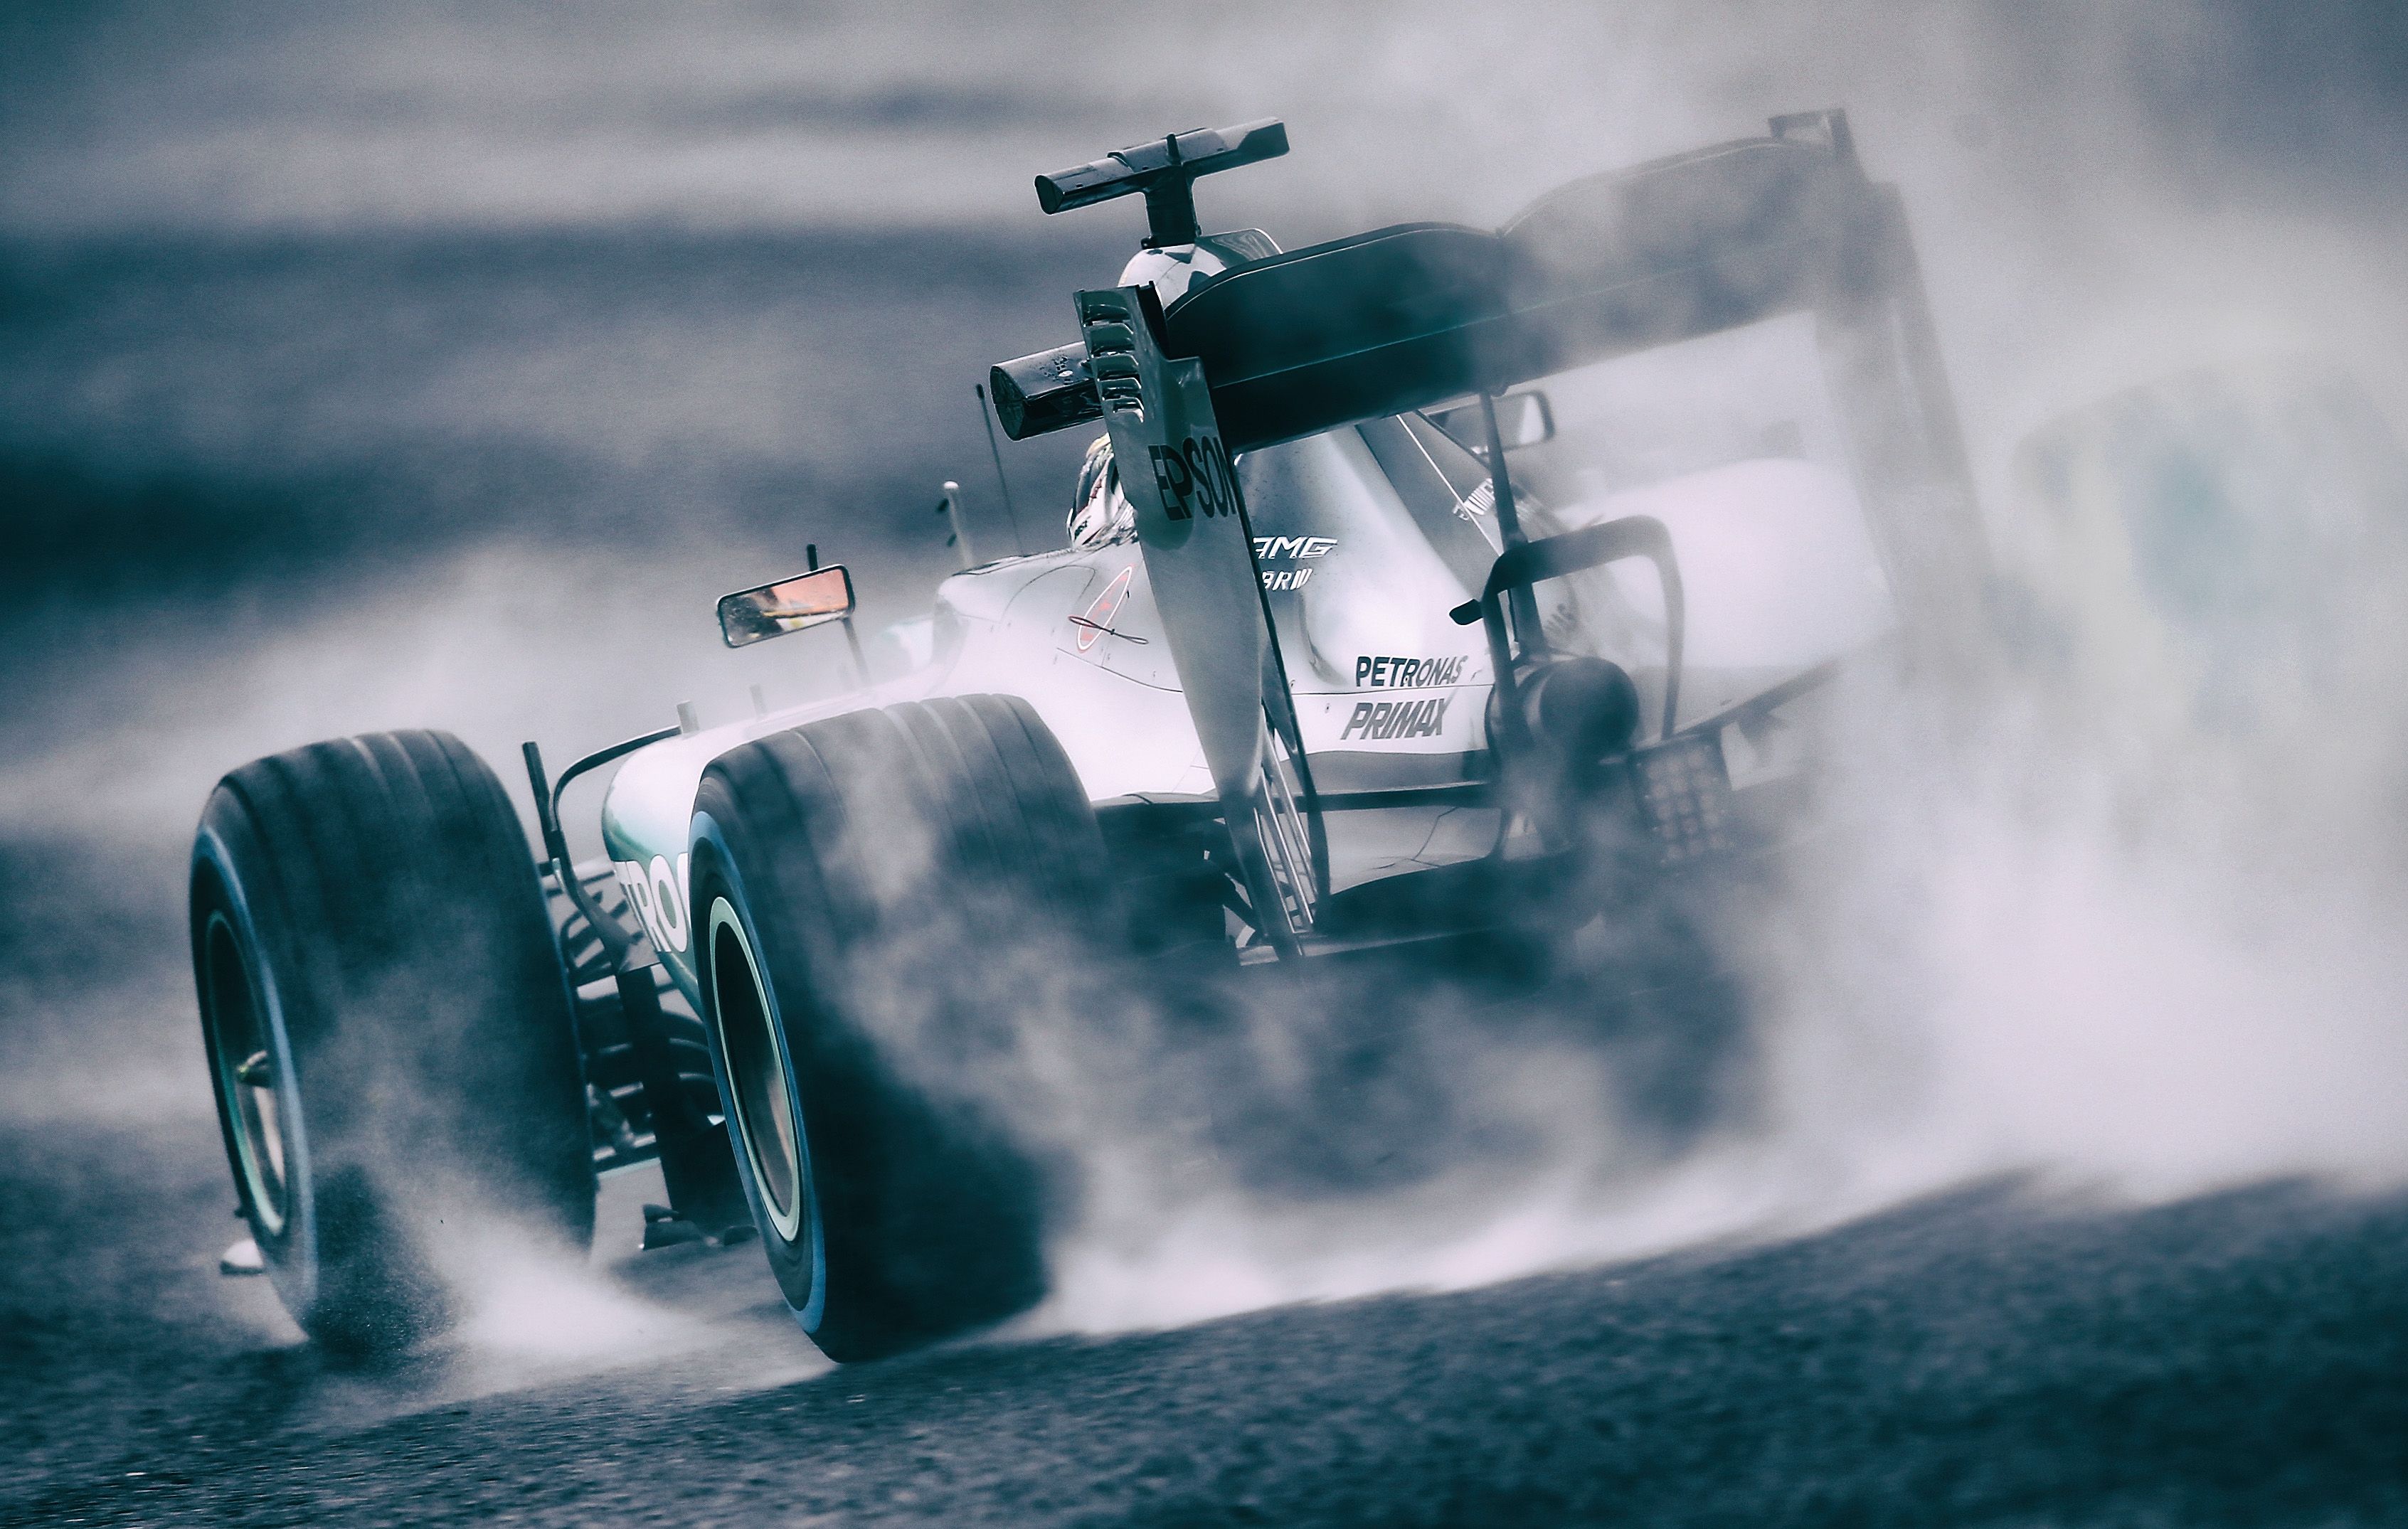 Image was created using digital filters) Lewis Hamilton of Britain and Mercedes GP drive during practice for the Formula One Japanese Grand Prix at Suzuka Circuit September 25, 2015 in Suzuka.  (Photo by Clive Mason/Getty Images)